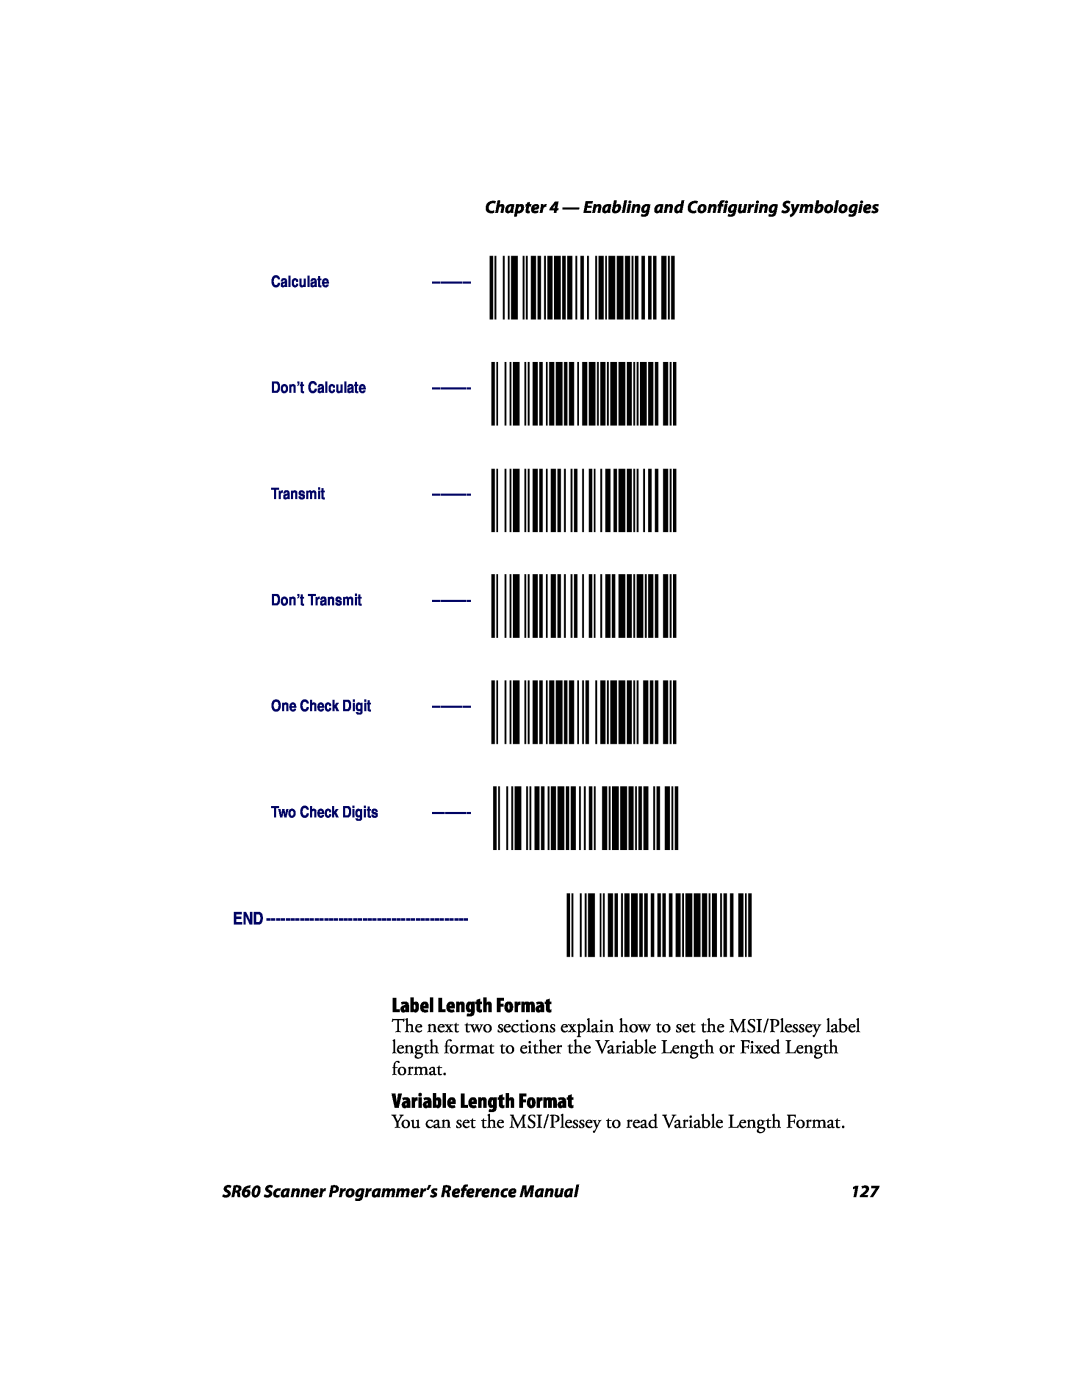 Intermec SR60 manual Label Length Format, Variable Length Format, Enabling and Configuring Symbologies, Two Check Digits 